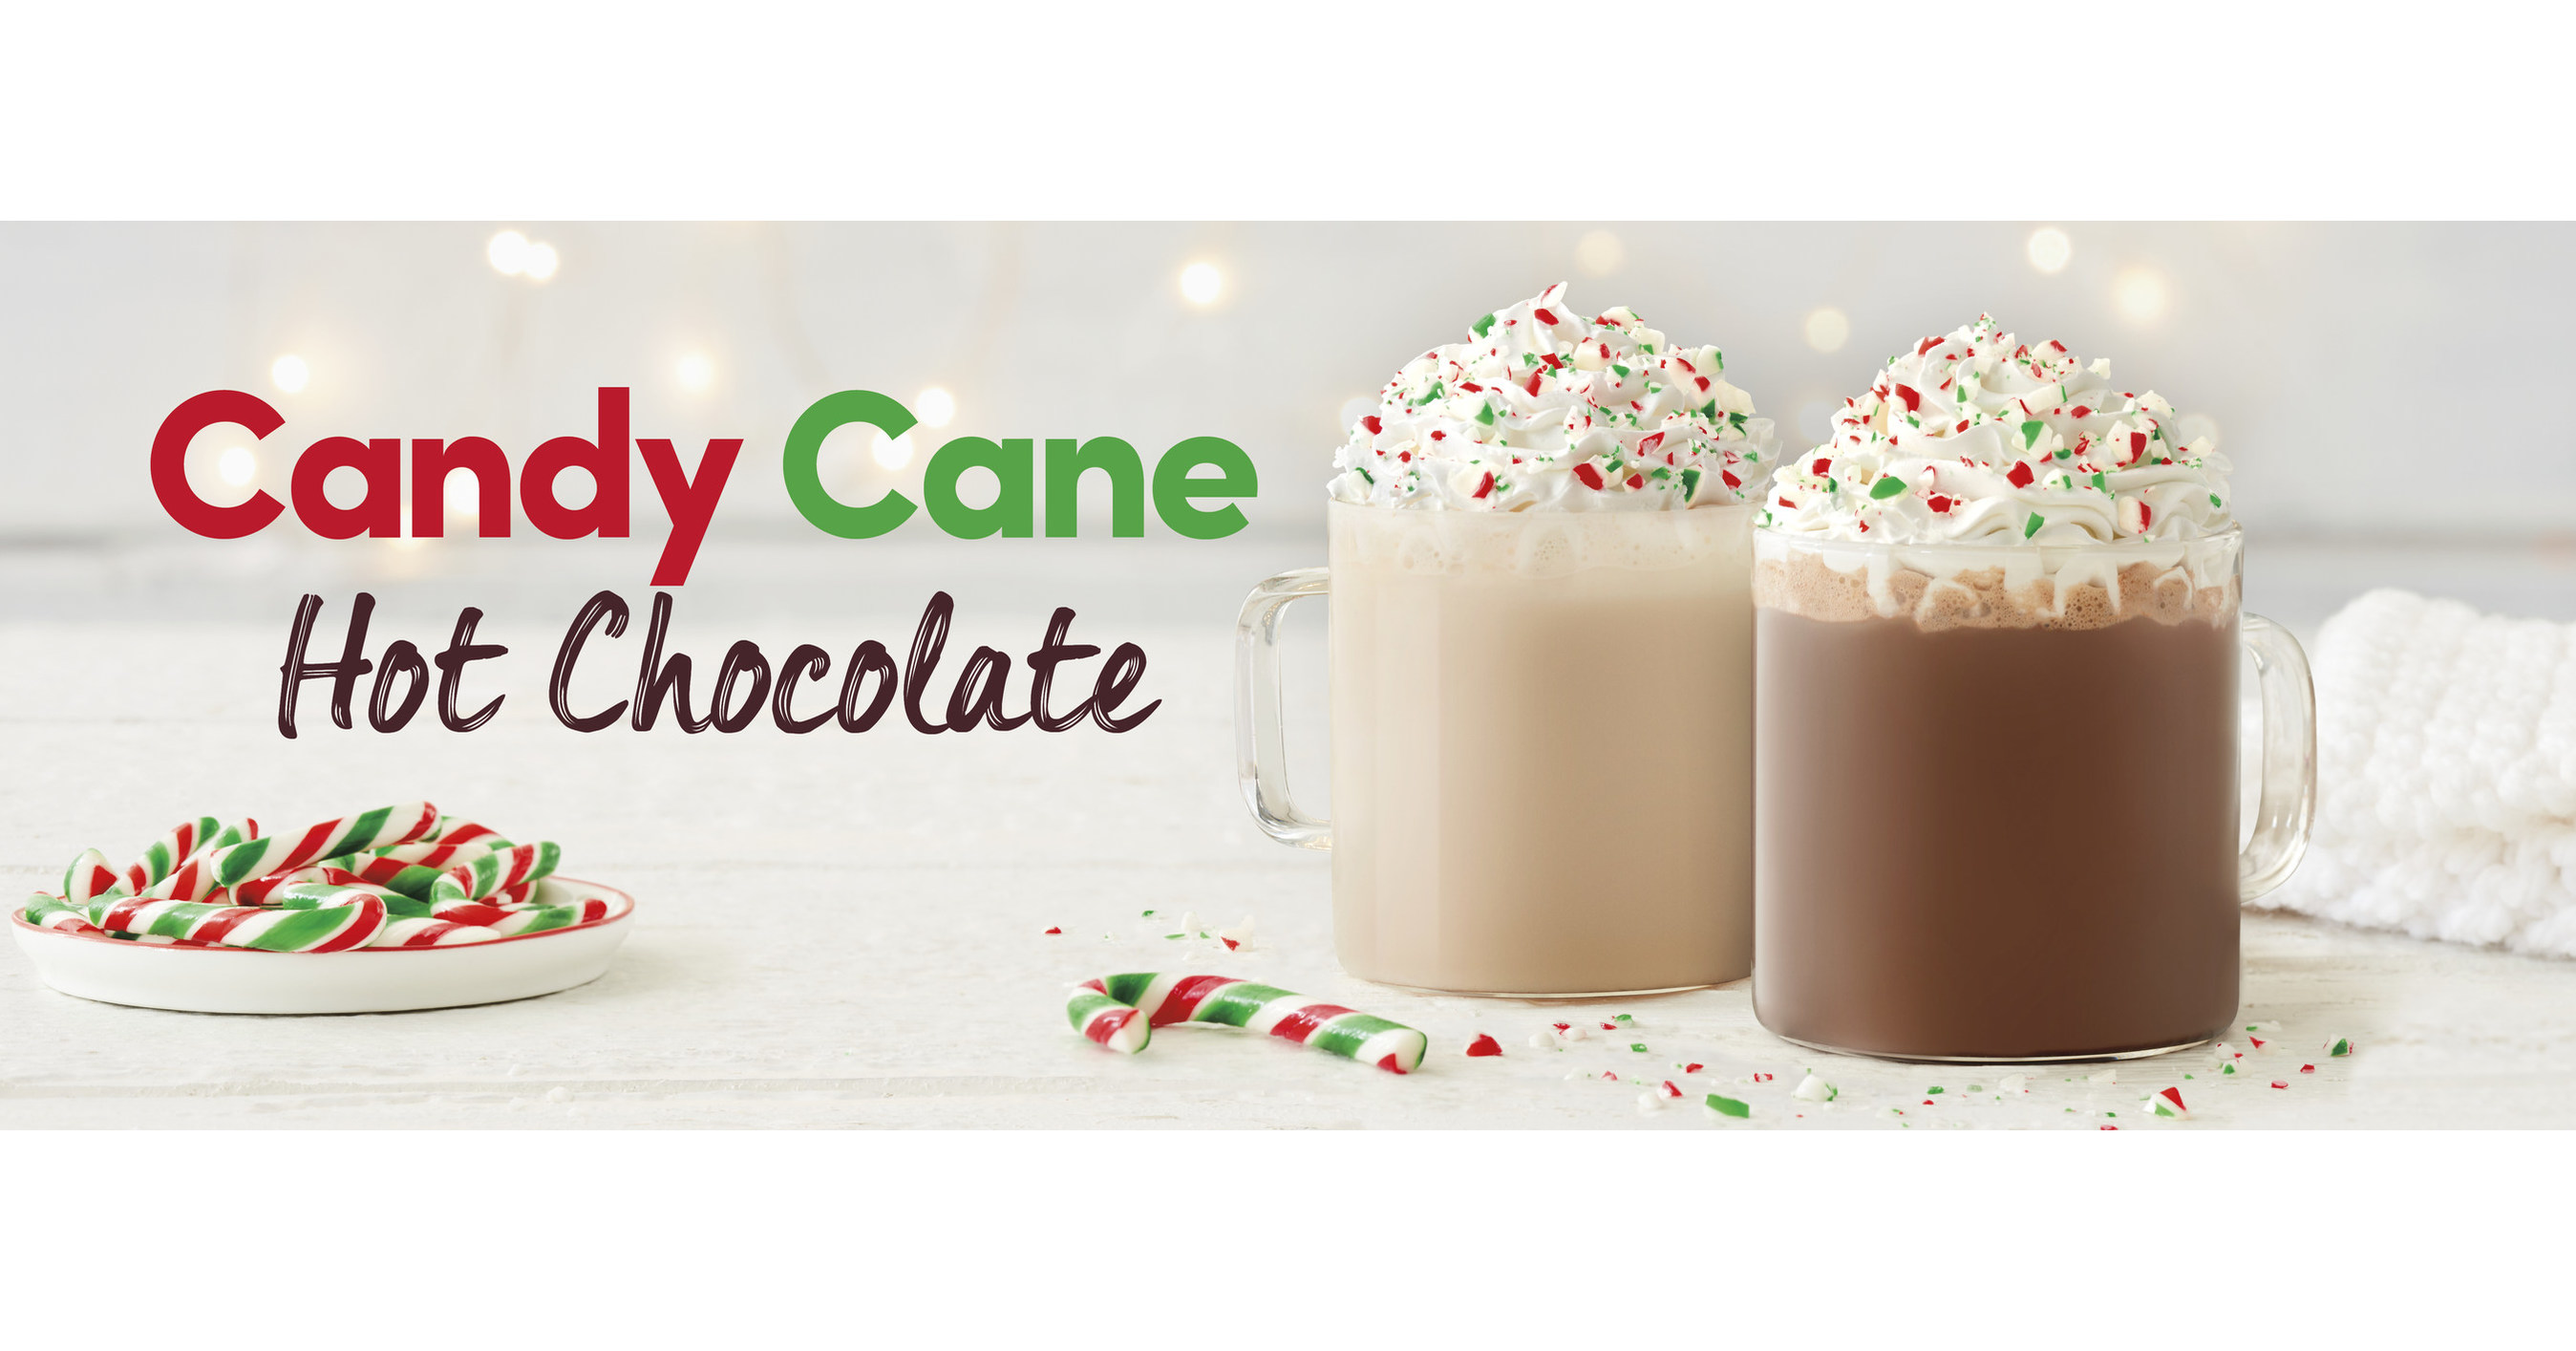 Tim Hortons just launched its new holiday cups and seasonal menu